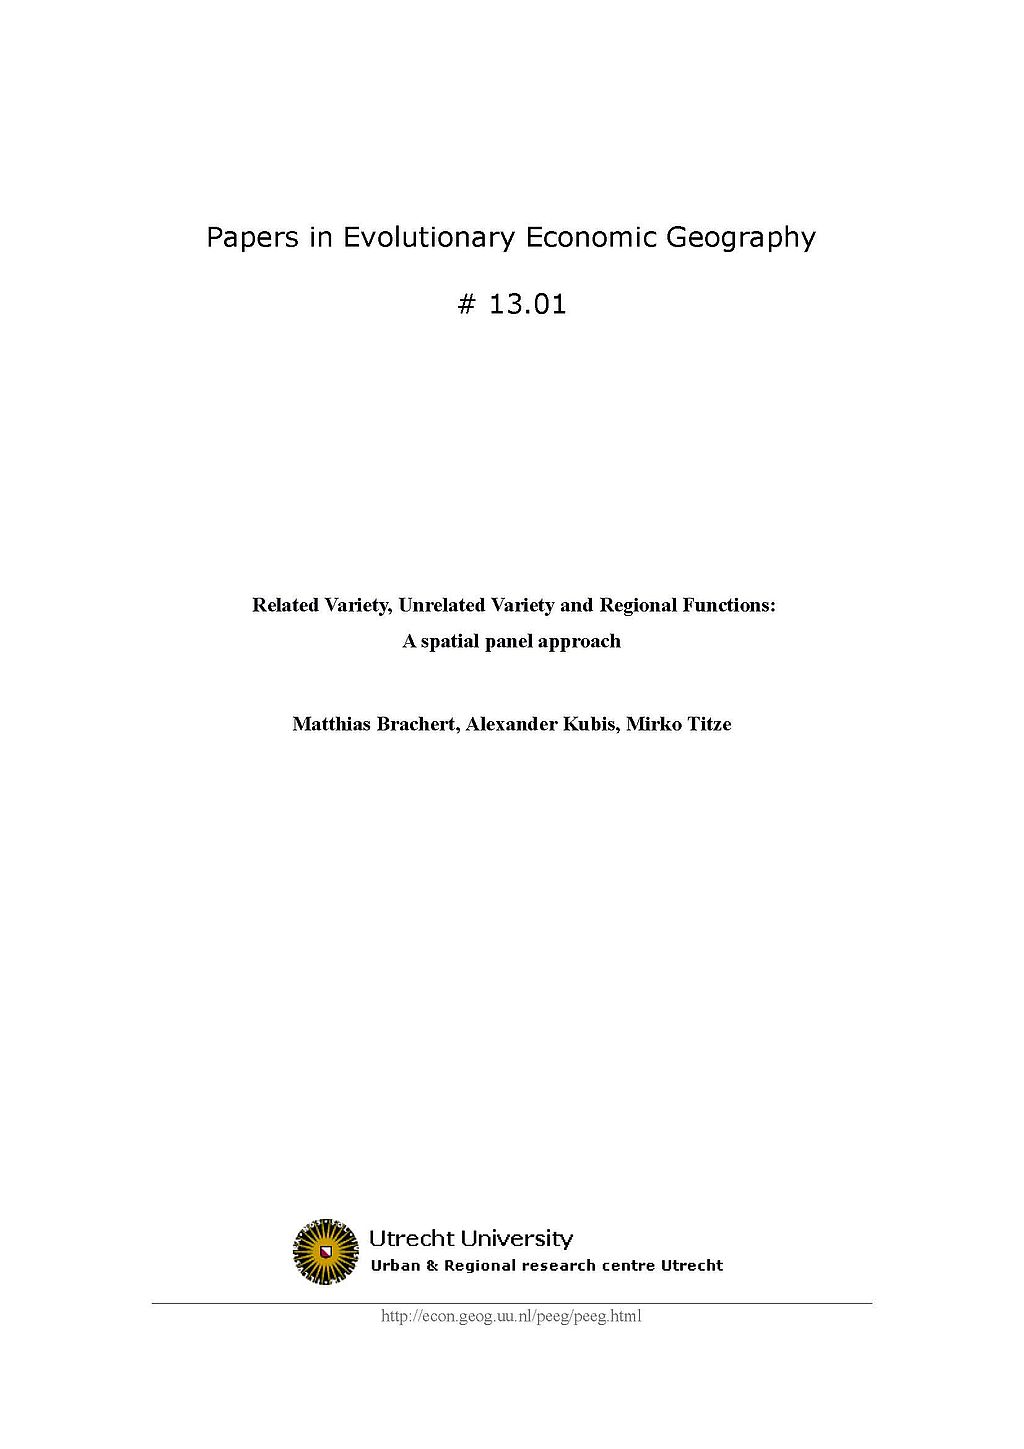 cover_Papers-in-Evolutionary-Economic-Geography_2013-01.jpg